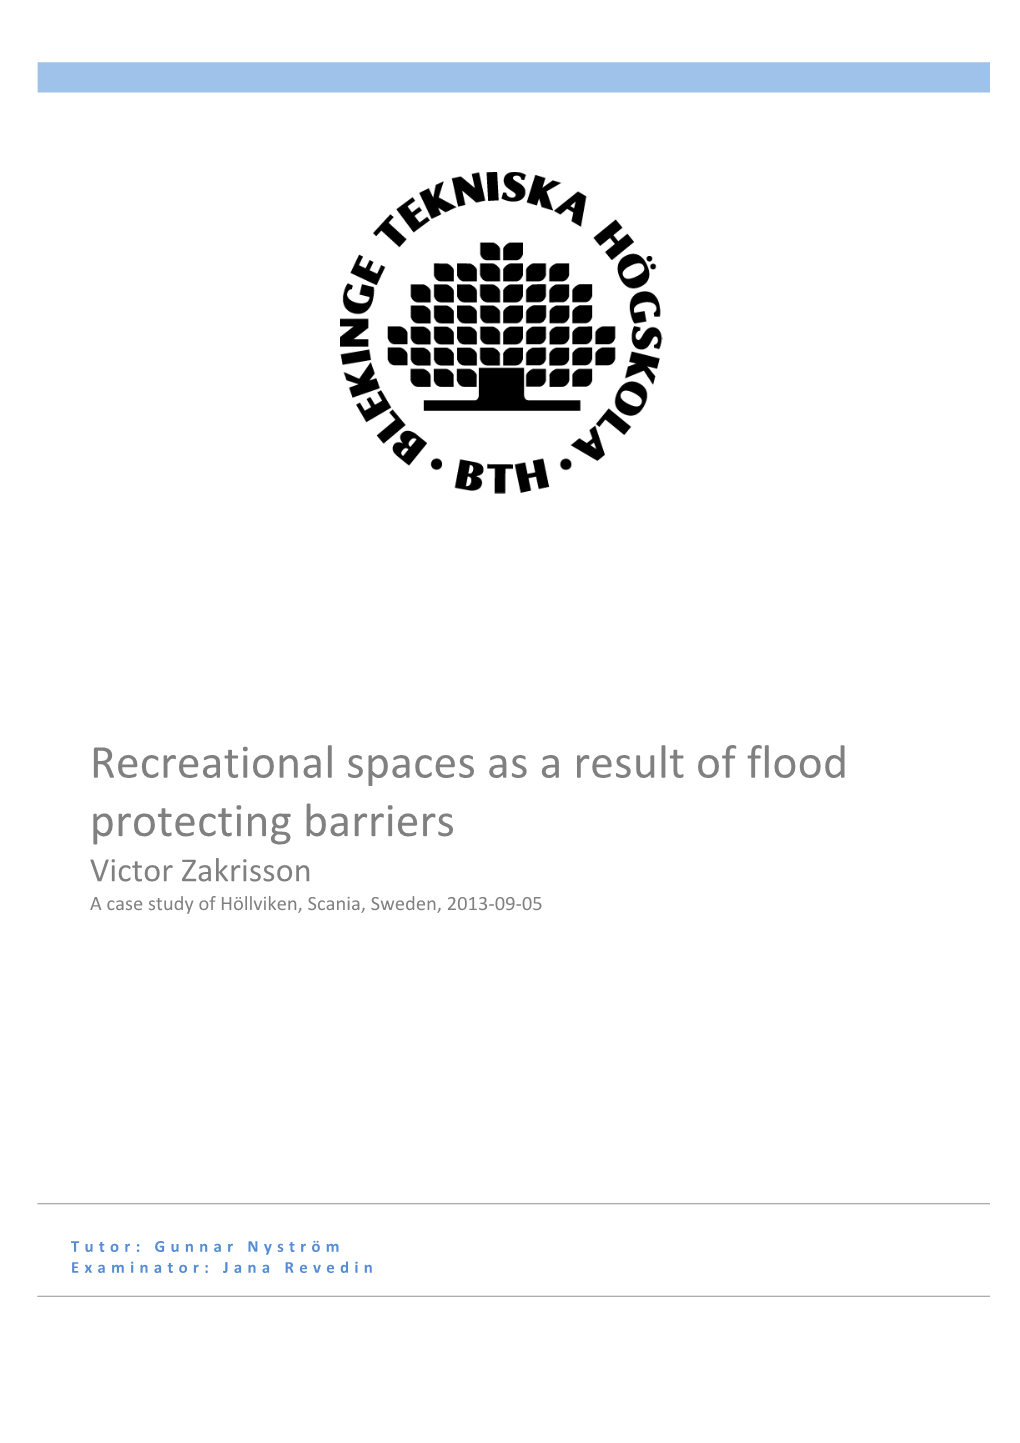 Recreational Spaces As a Result of Flood Protecting Barriers Victor Zakrisson a Case Study of Höllviken, Scania, Sweden, 2013-09-05